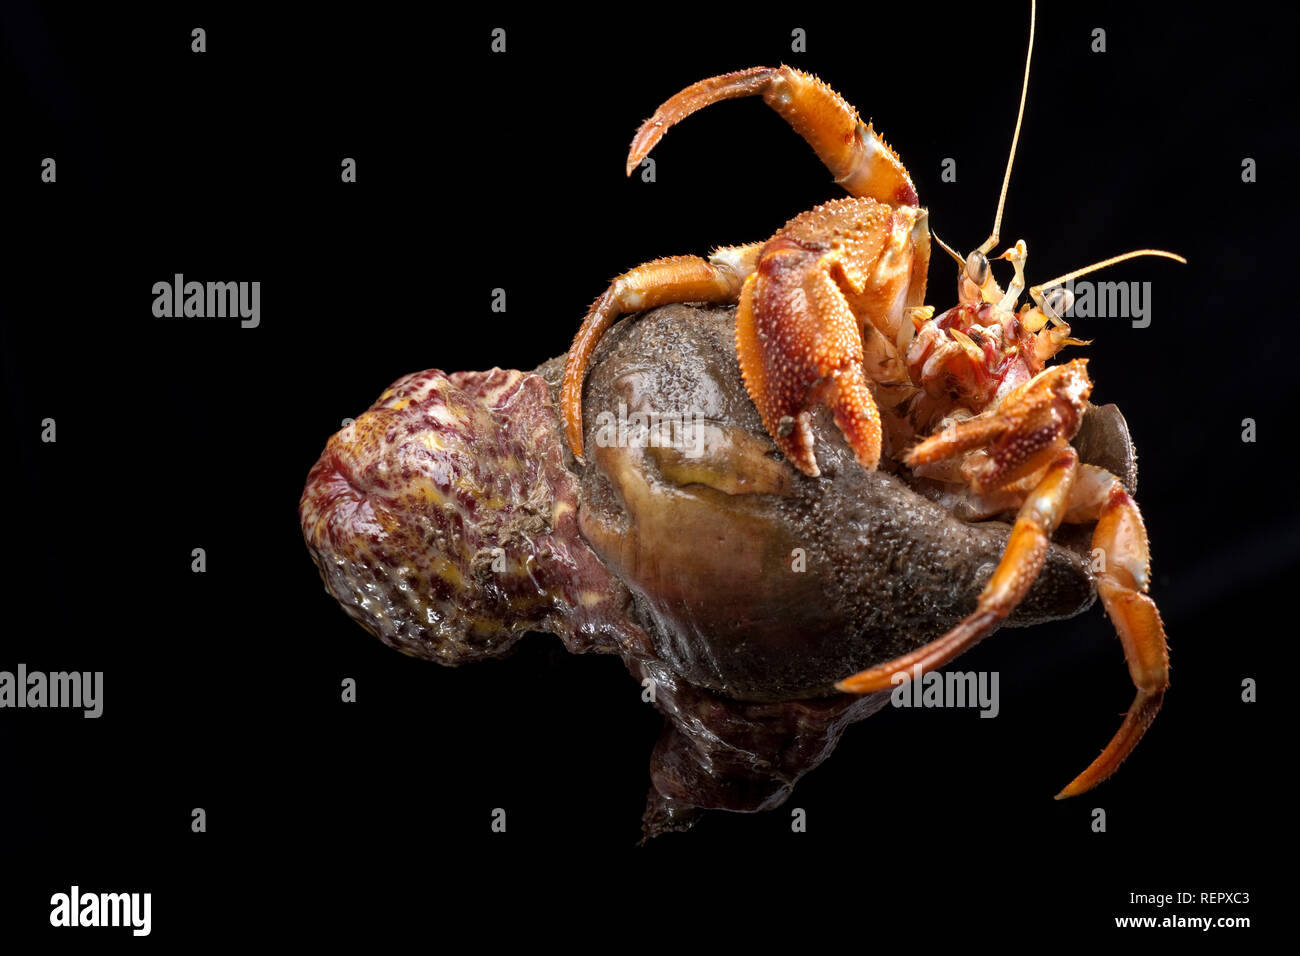 A common hermit crab, Pagurus bernhardus, occupying a whelk shell with a sea anemone, Calliactis parasitica attached to the rear of the shell. Photogr Stock Photo